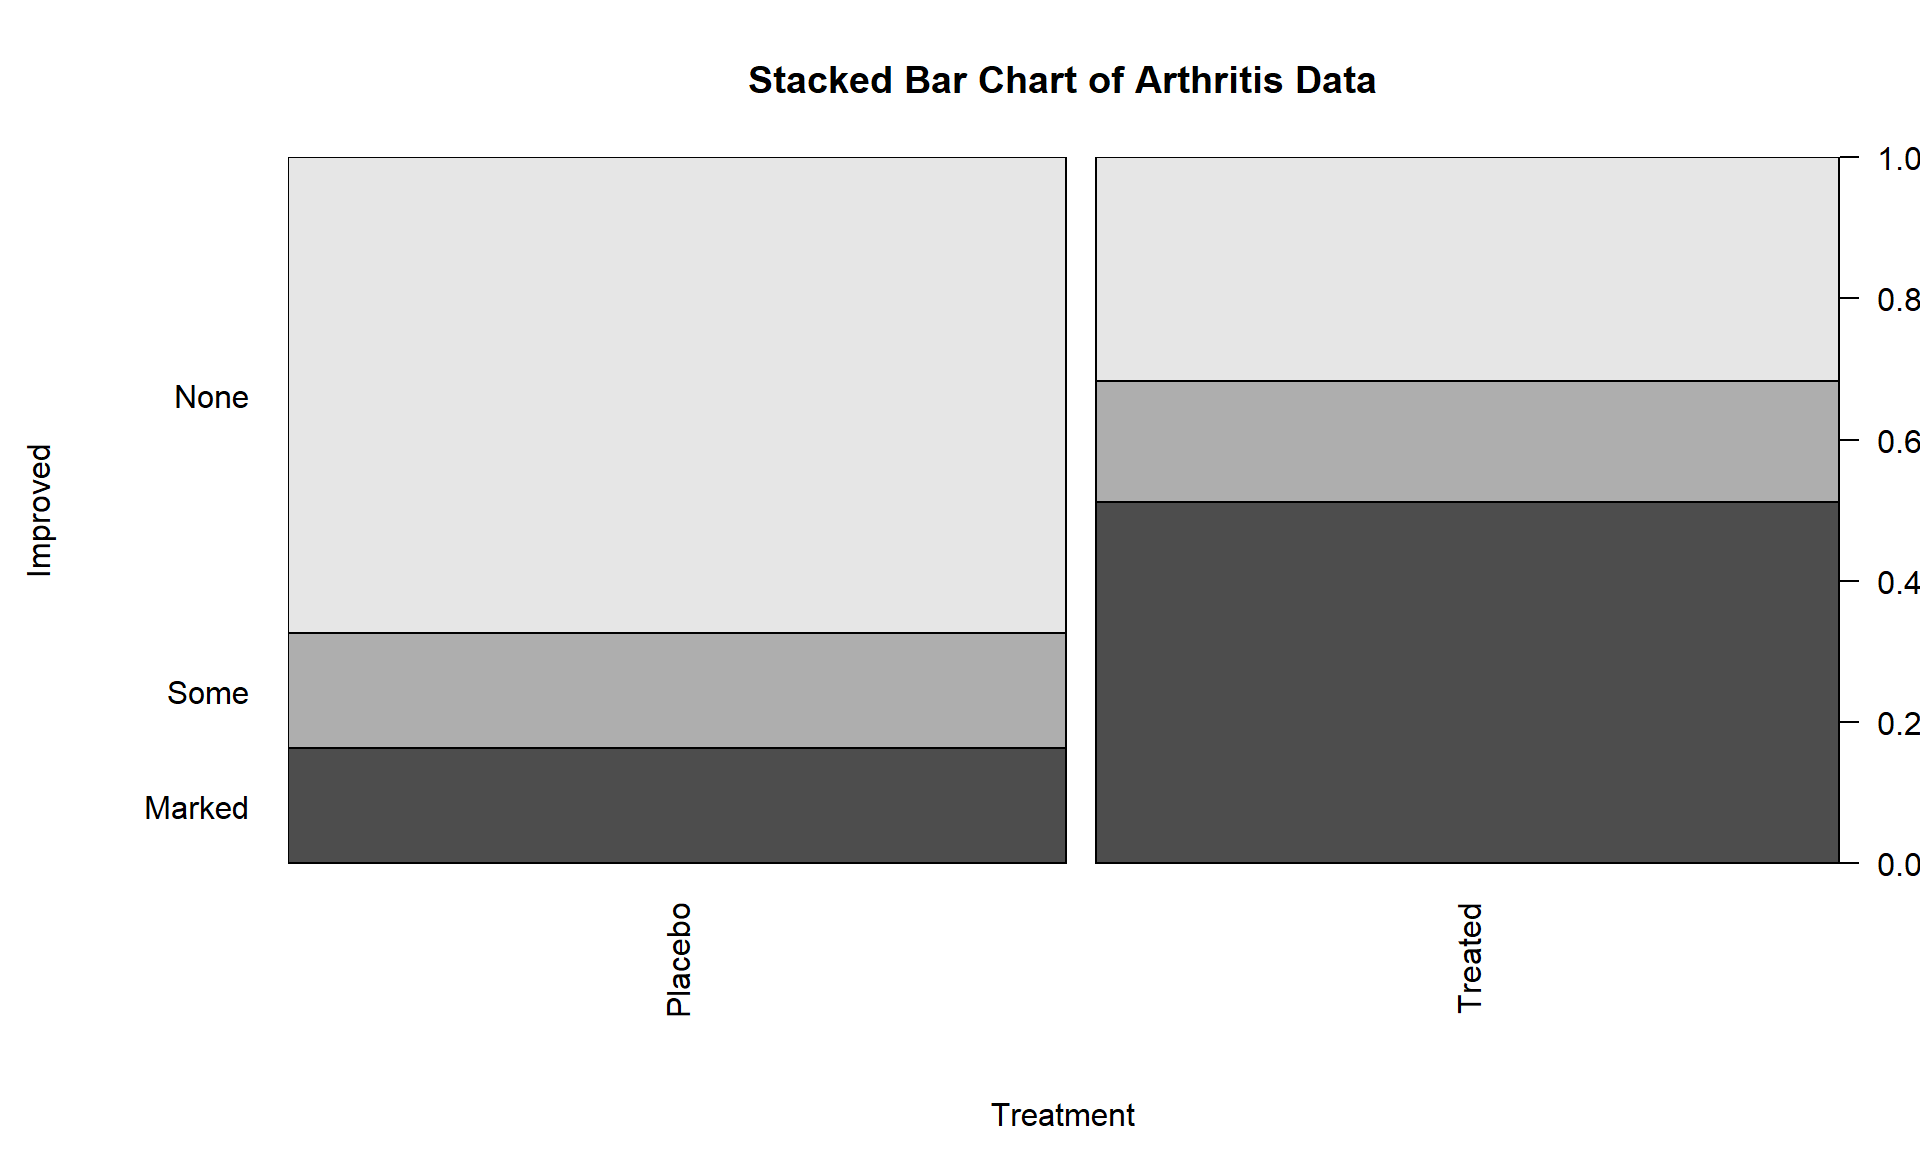 Stacked bar chart of the Arthritis data comparing Treated and Placebo.